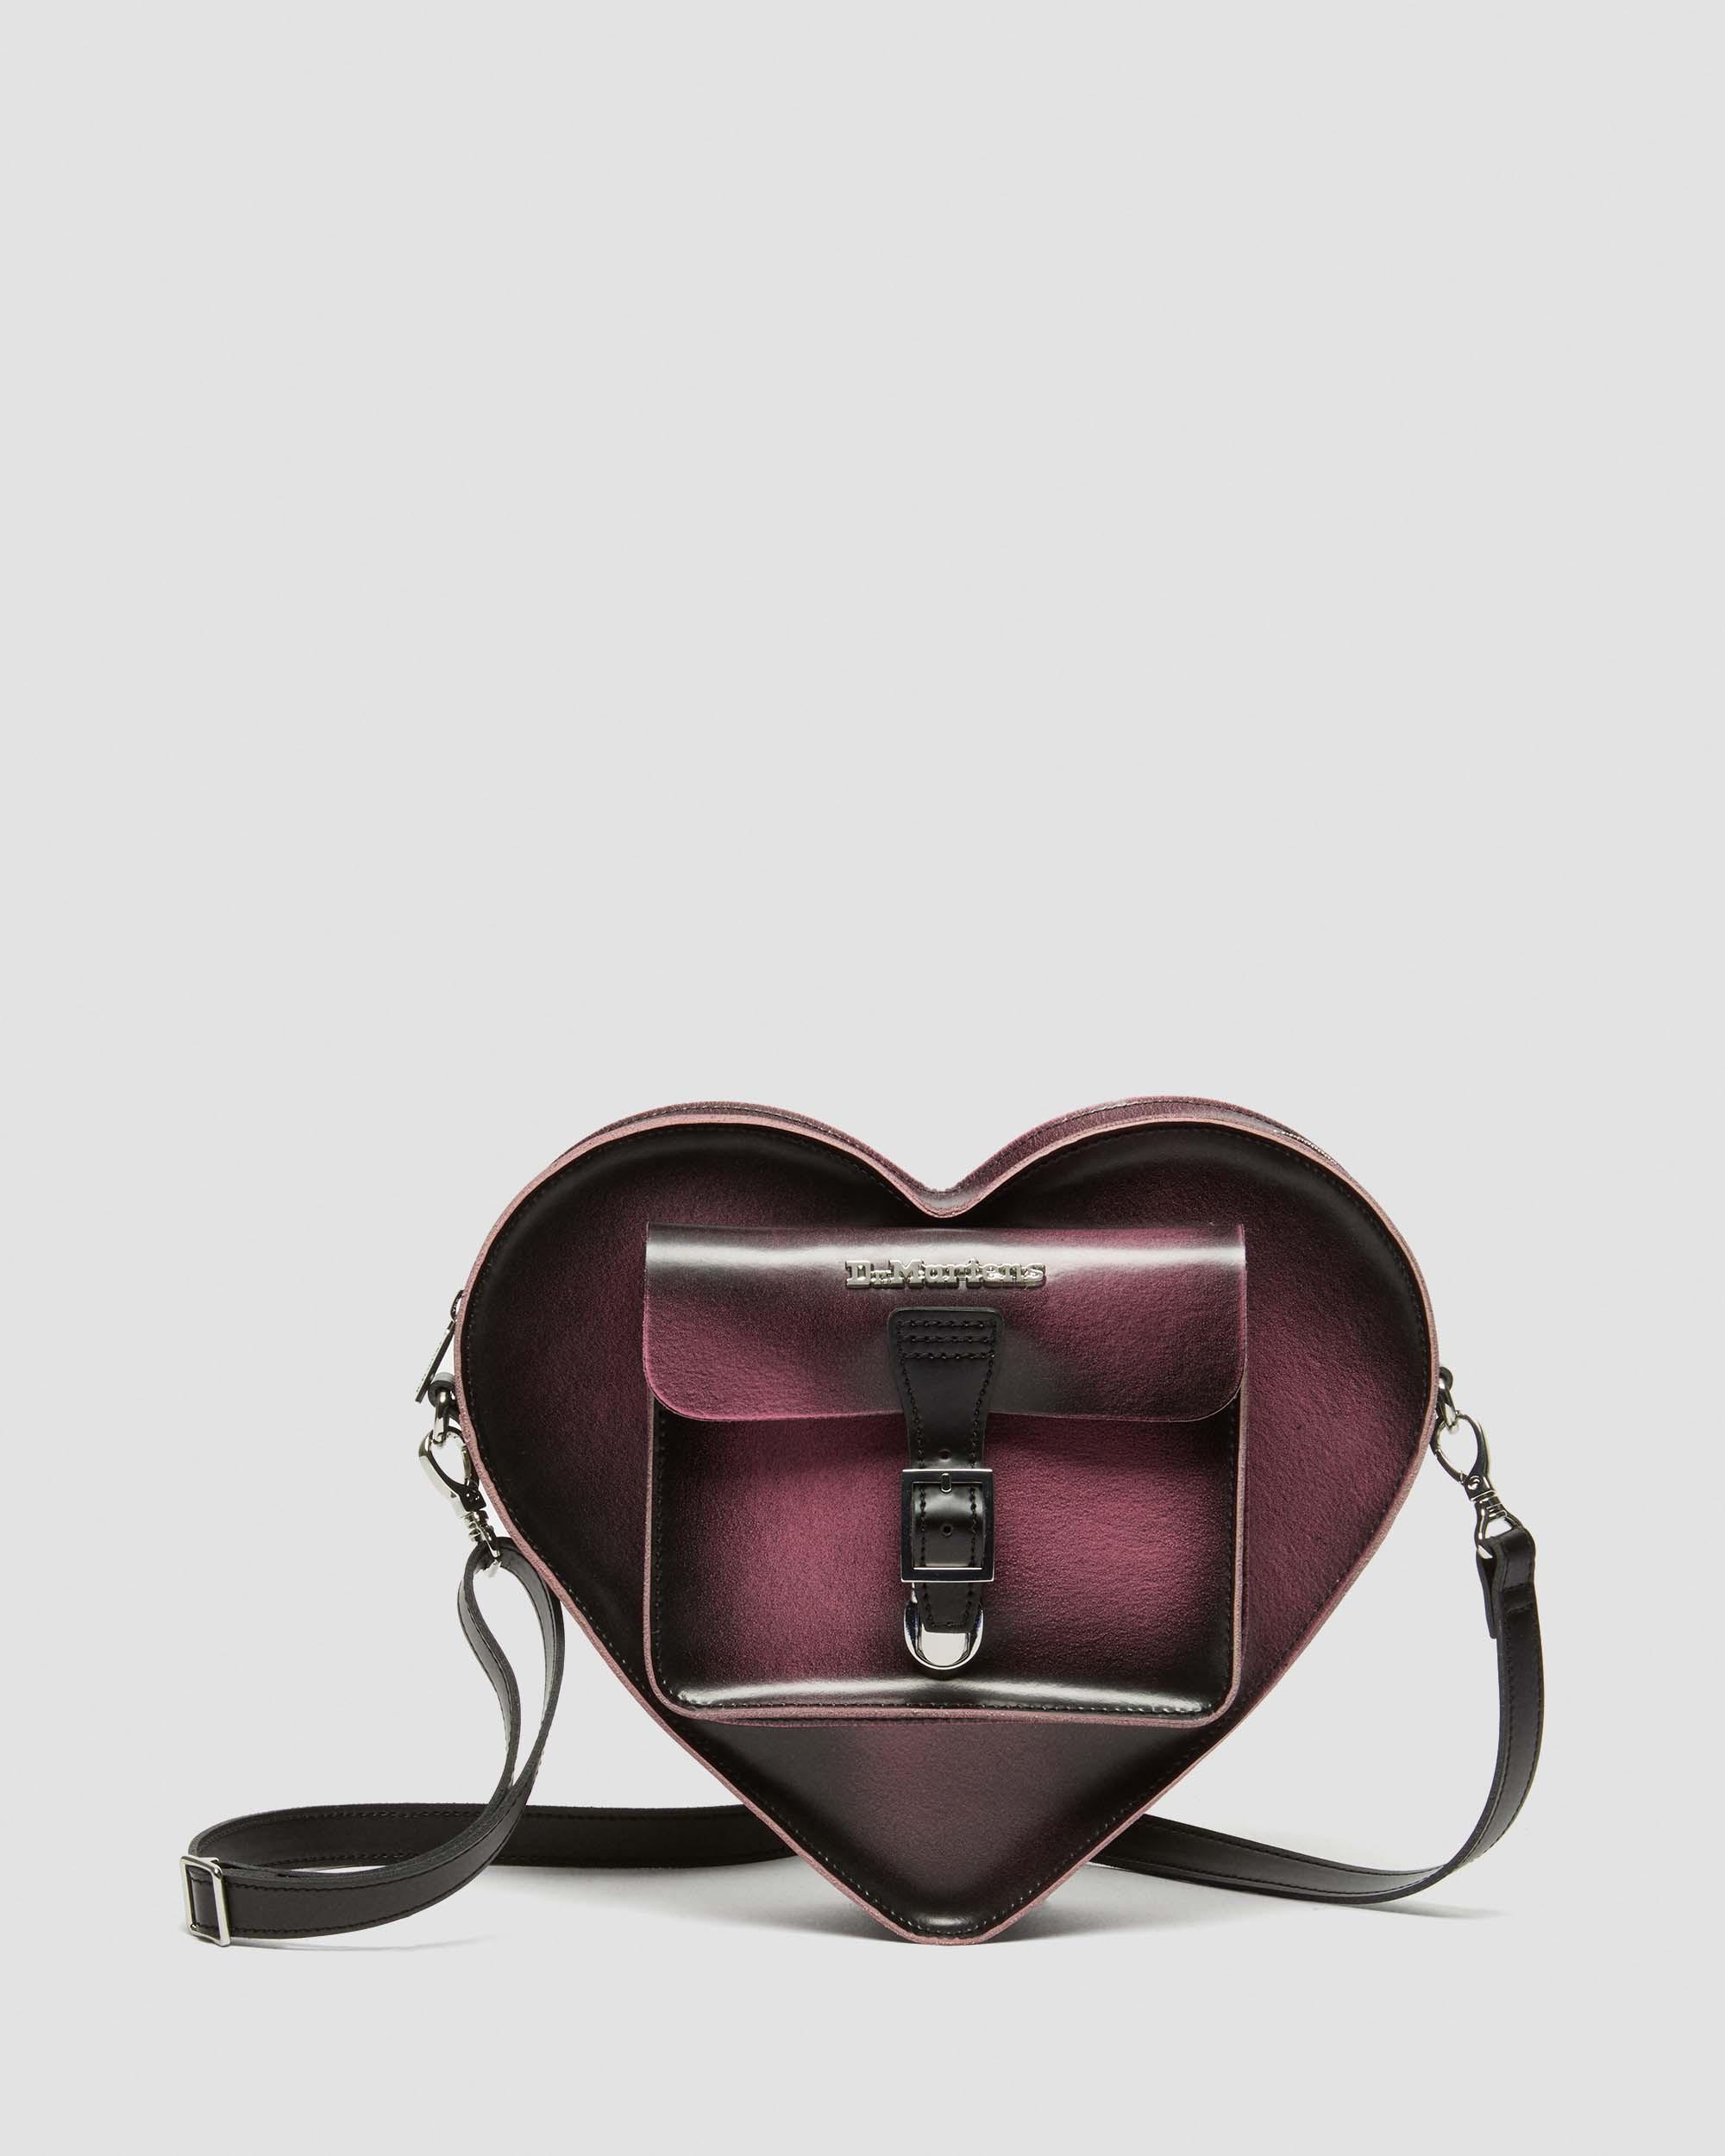 Heart Shaped Distressed Look Leather Bag in Black+Fondant Pink